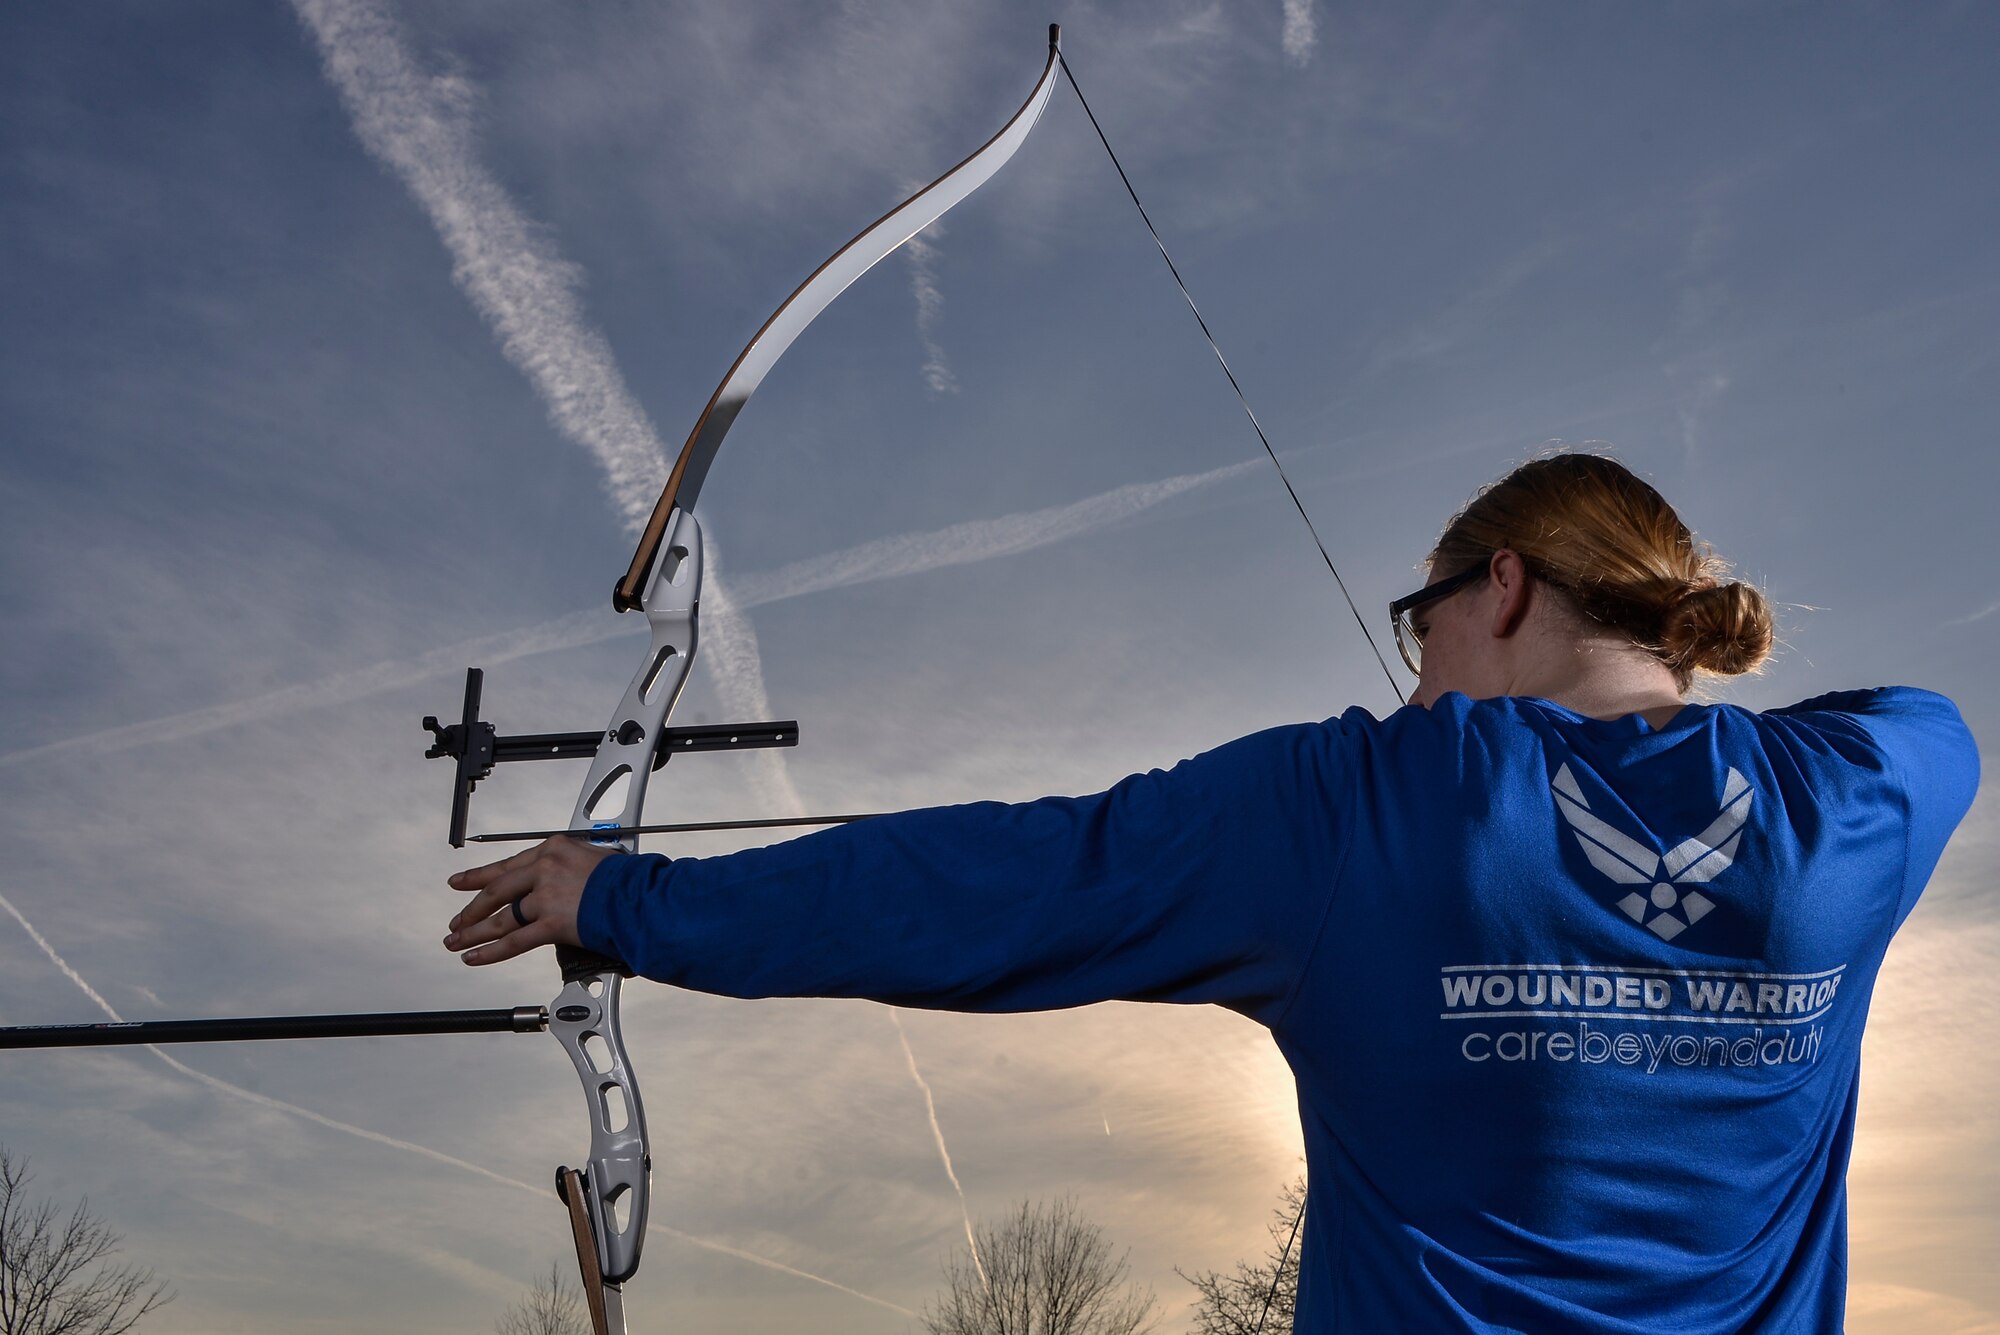 Senior Airman Karah Behrend, Air Force Wounded Warrior, poses for a portrait with her recurve bow that she practices with at Fort George G. Meade, Md., Feb. 7, 2018. Behrend was diagnosed with Reflex Sympathetic Dystrophy (RSD) in 2015. She became an Air Force Wounded Warrior in 2016 and is competing in the 2018 Wounded Warriors team trial for the Air Force. (U.S. Air Force by Staff Sgt. Alexandre Montes)